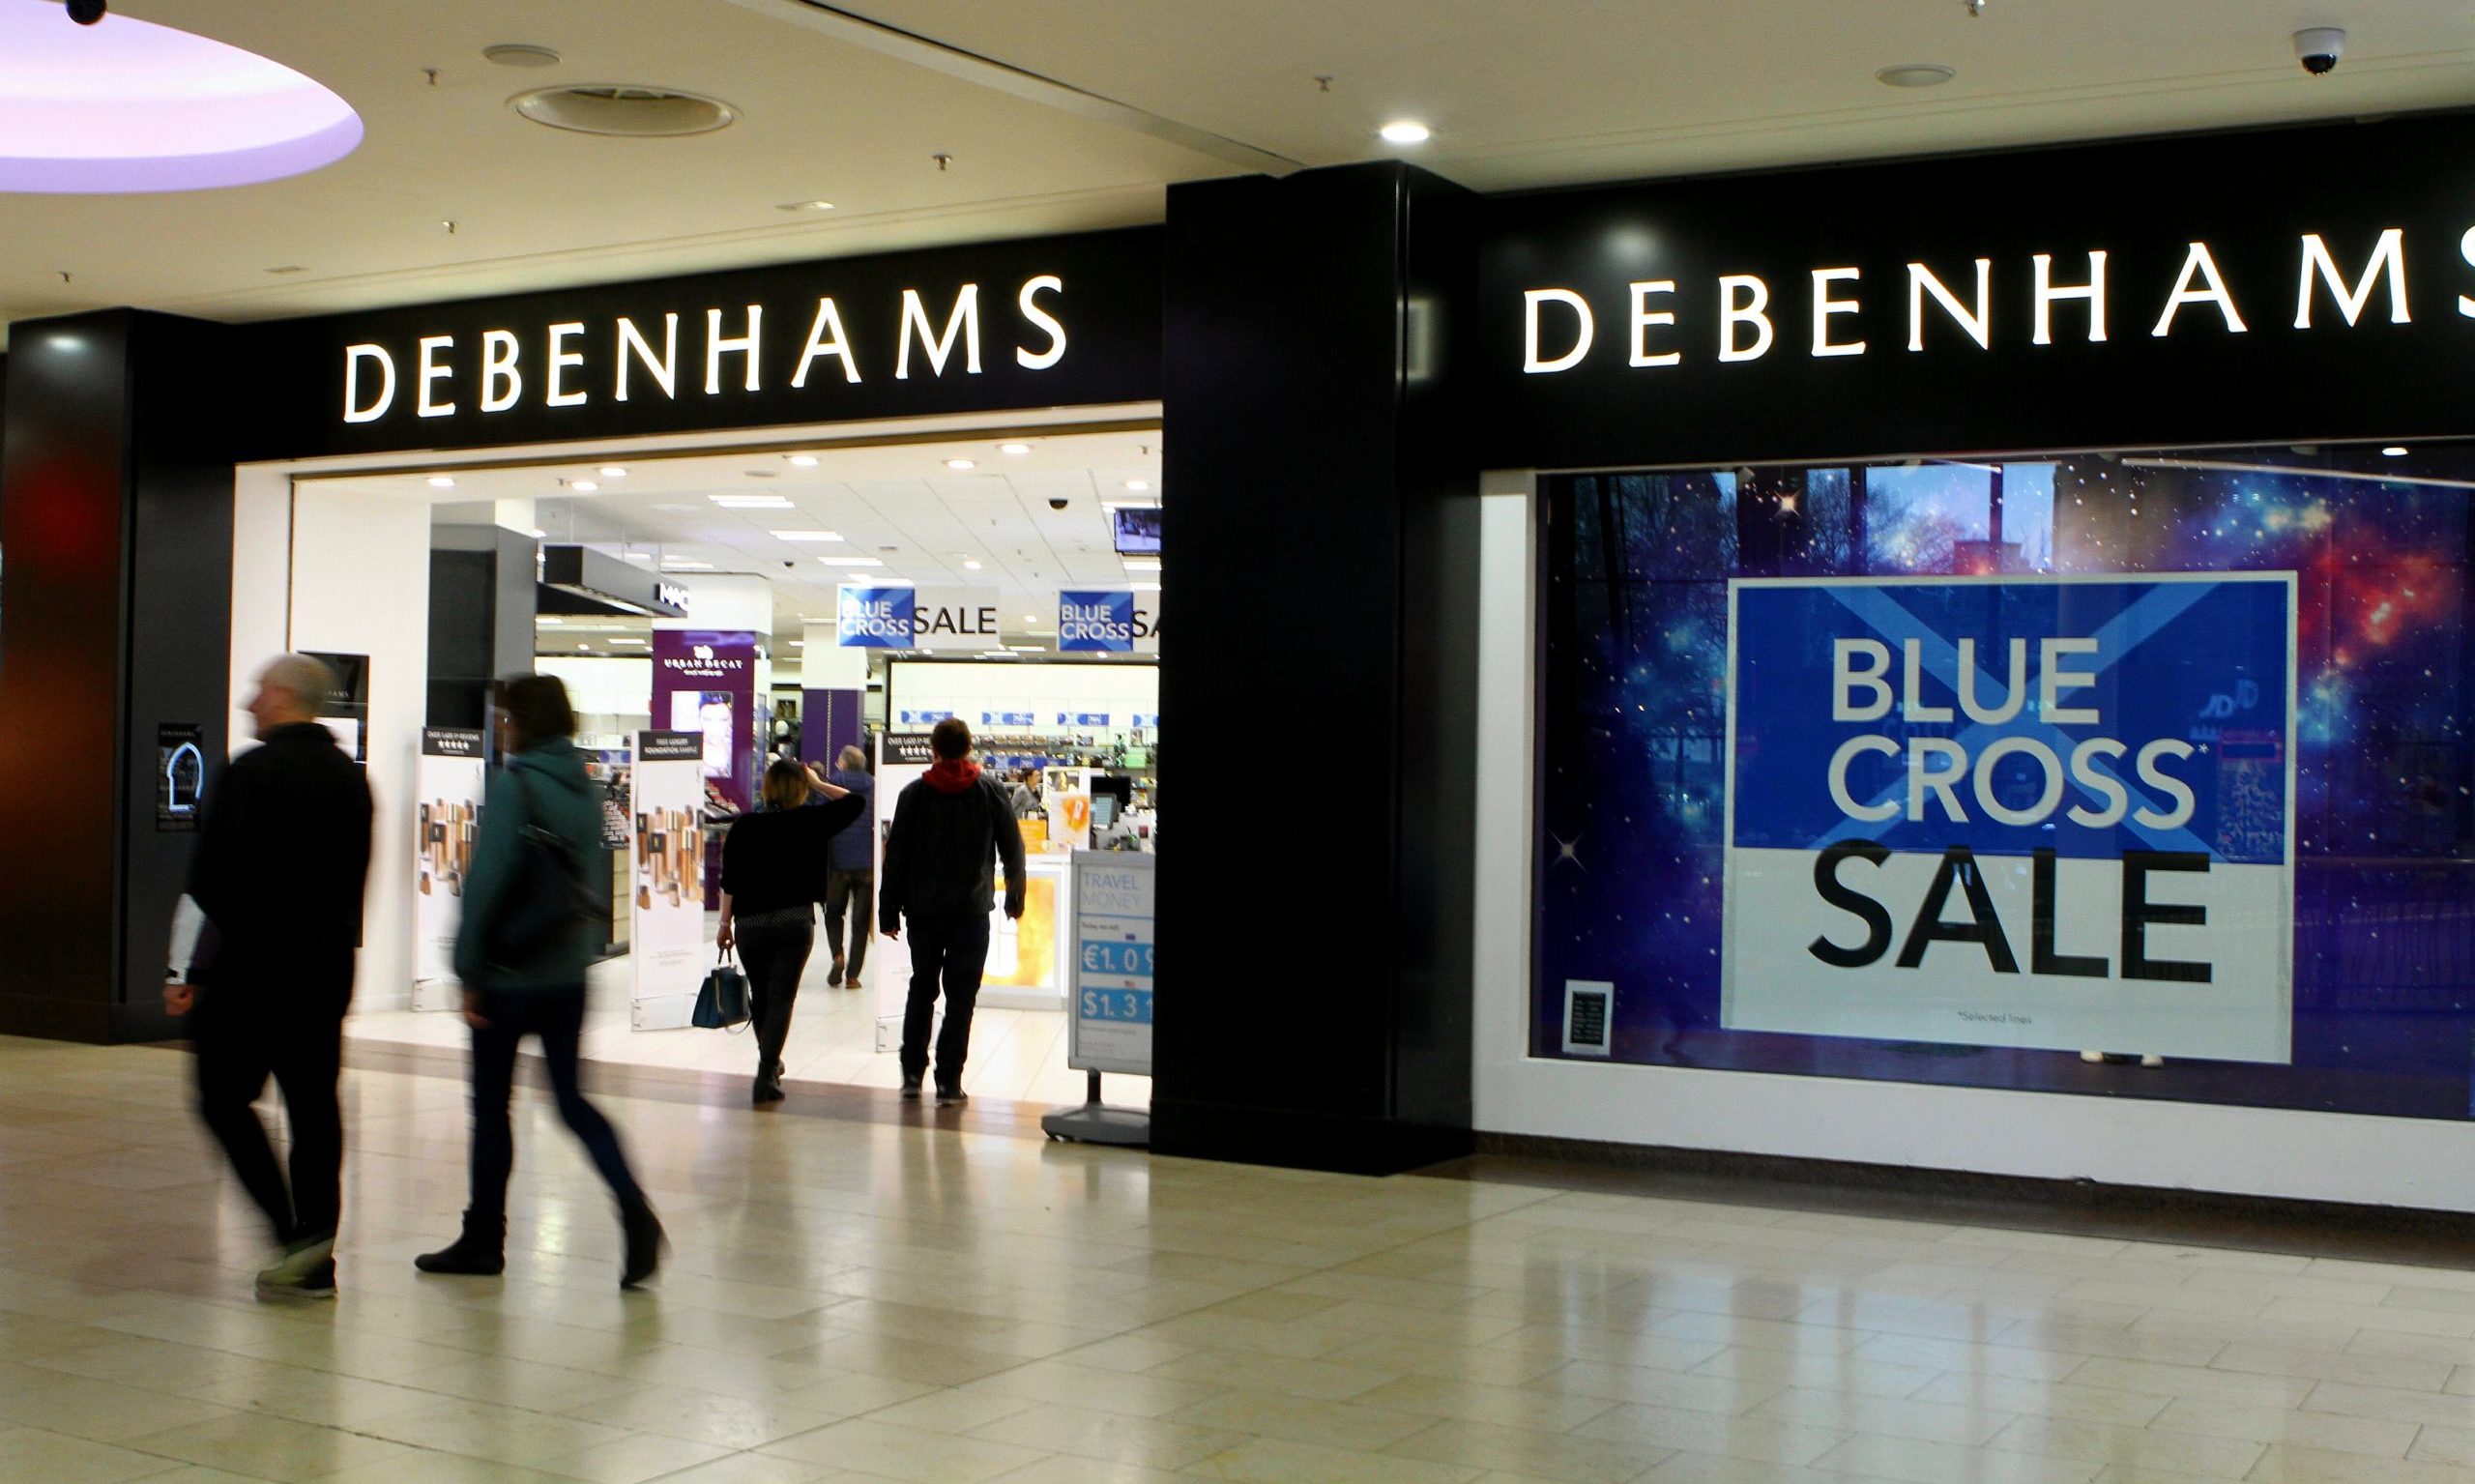 Debenhams in the Overgate Shoping Centre in Dundee.